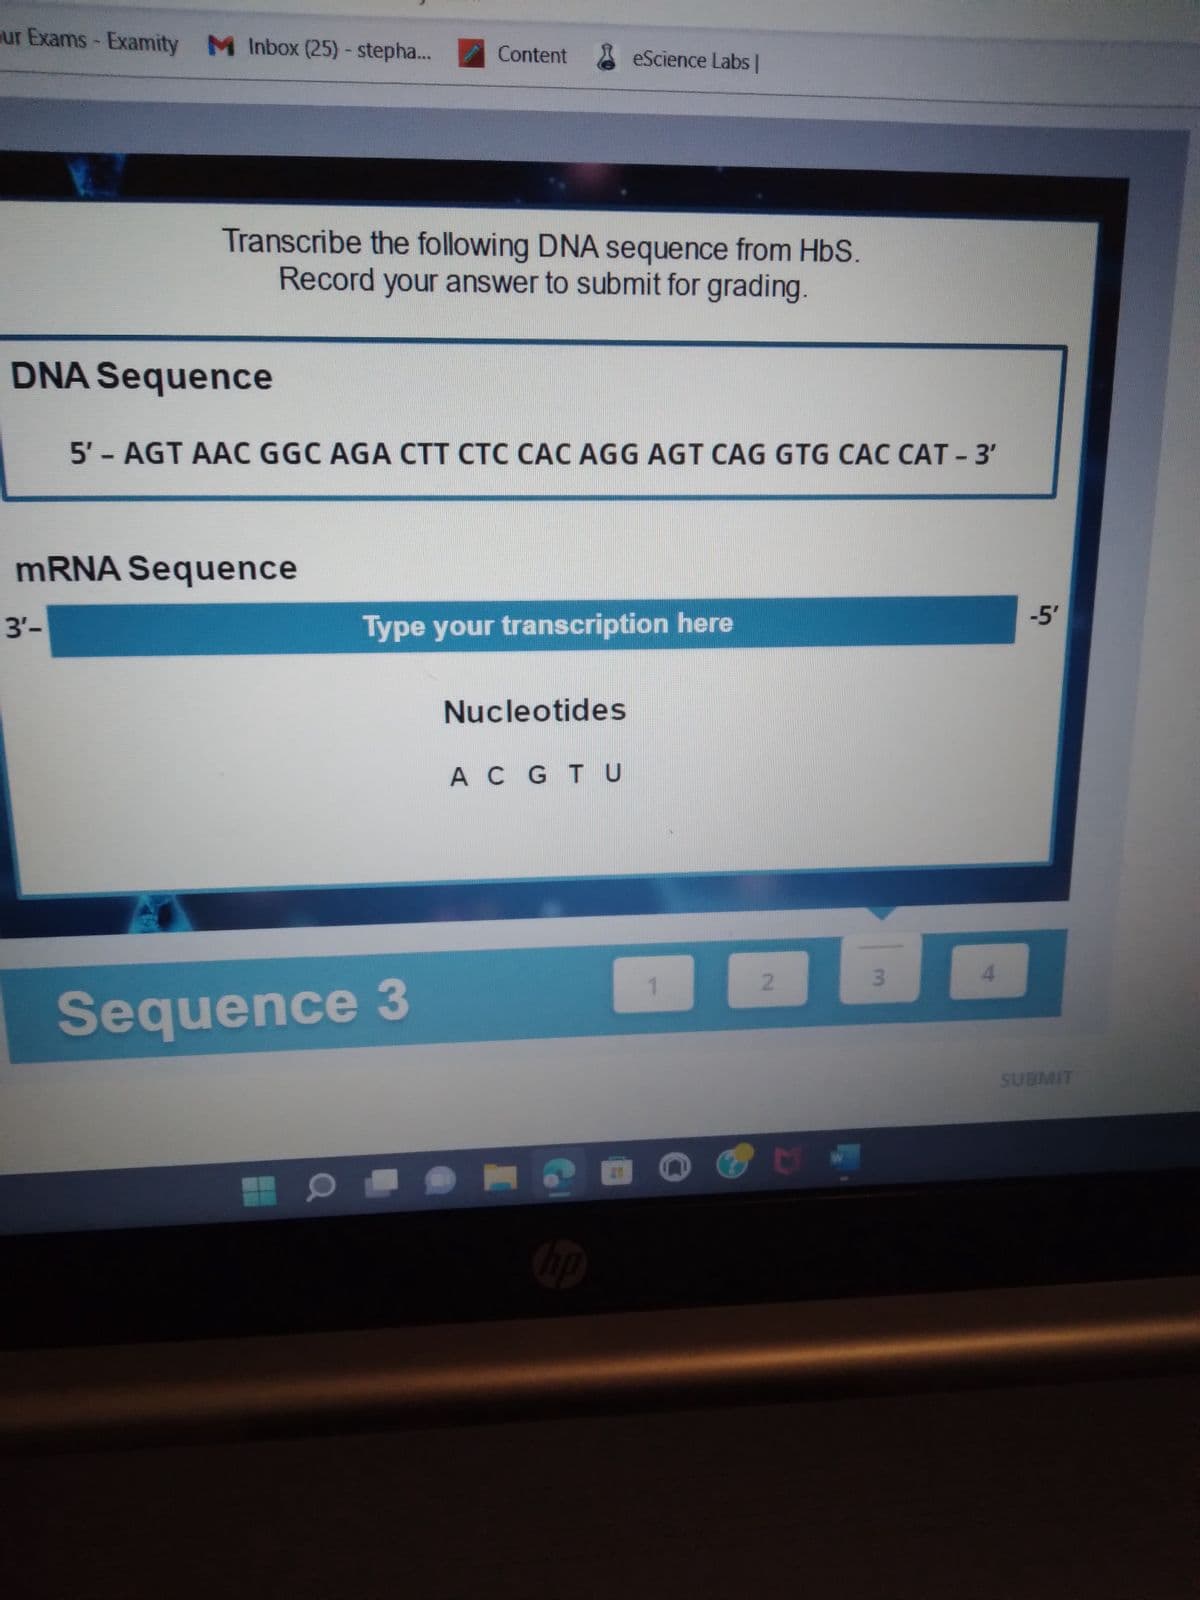 ur Exams - Examity M Inbox (25) - stepha...
DNA Sequence
3'-
Transcribe the following DNA sequence from HbS.
Record your answer to submit for grading.
mRNA Sequence
Content
5'- AGT AAC GGC AGA CTT CTC CAC AGG AGT CAG GTG CAC CAT - 3'
Sequence 3
Type your transcription here
eScience Labs
Nucleotides
A CGT U
hp
2
3
4
-5'
SUBMIT